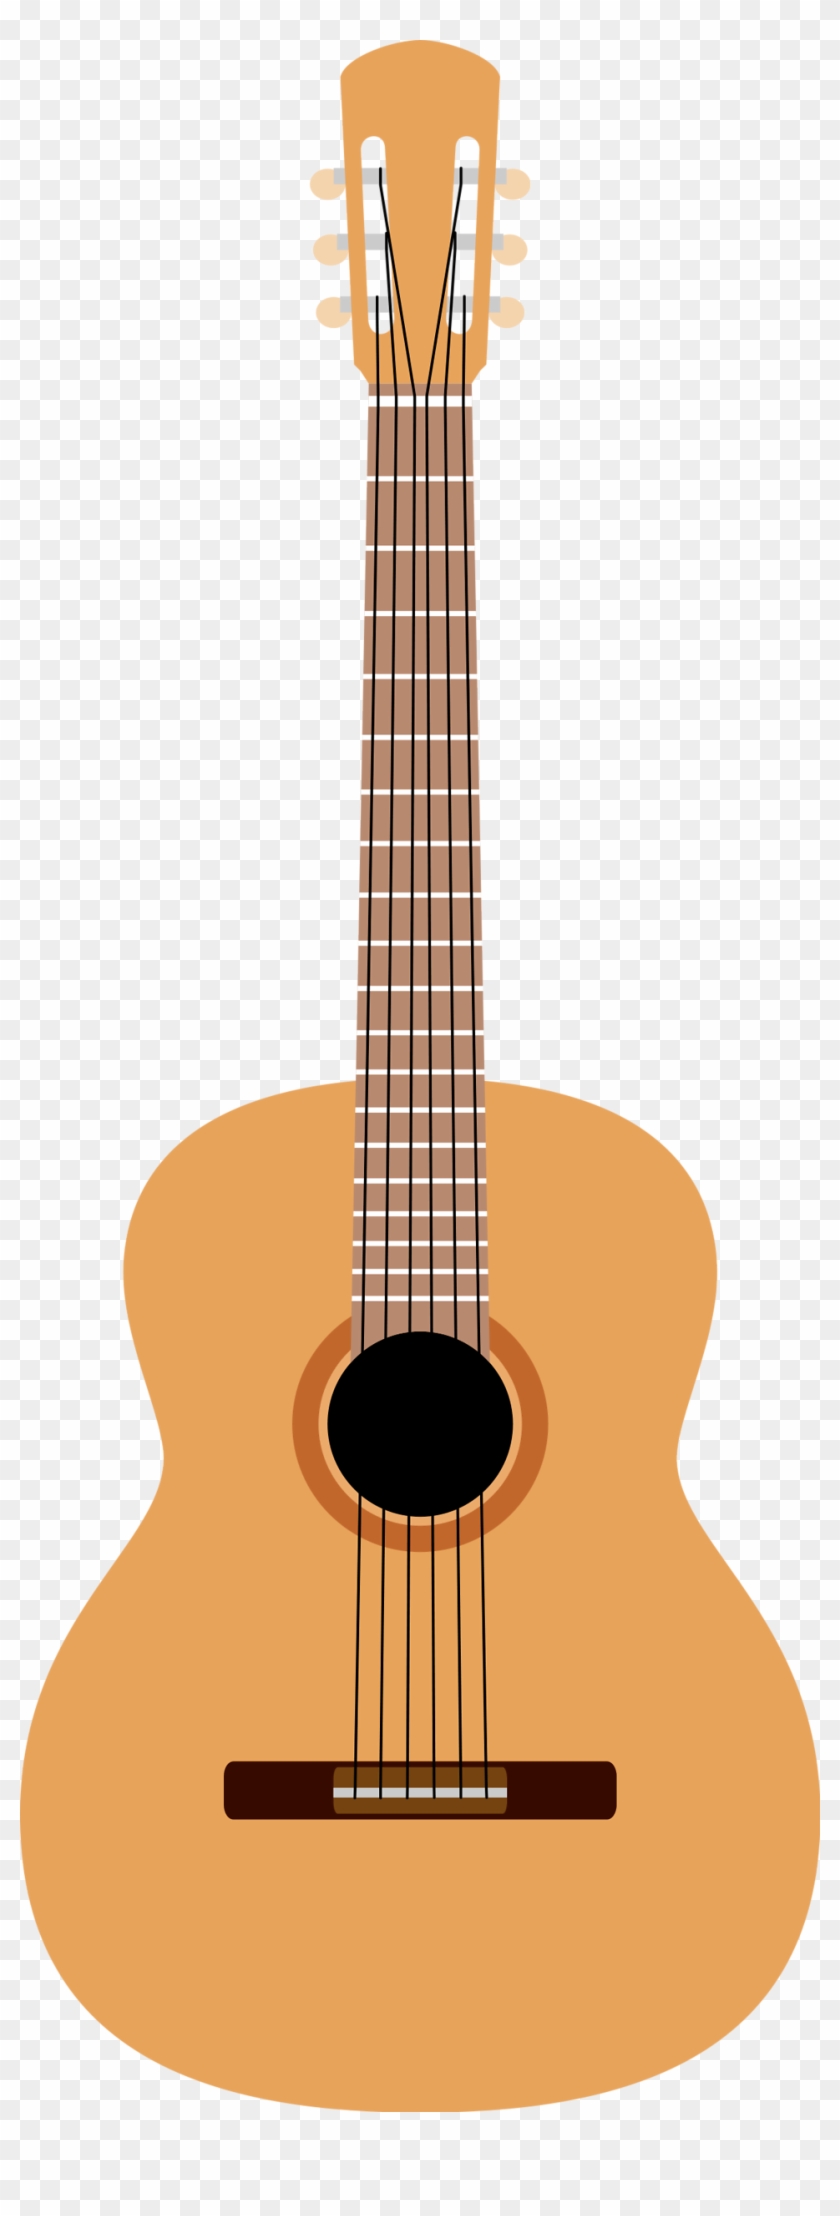 How To Set Use Guitar By Rones Svg Vector - Acoustic Guitar Clipart #932070